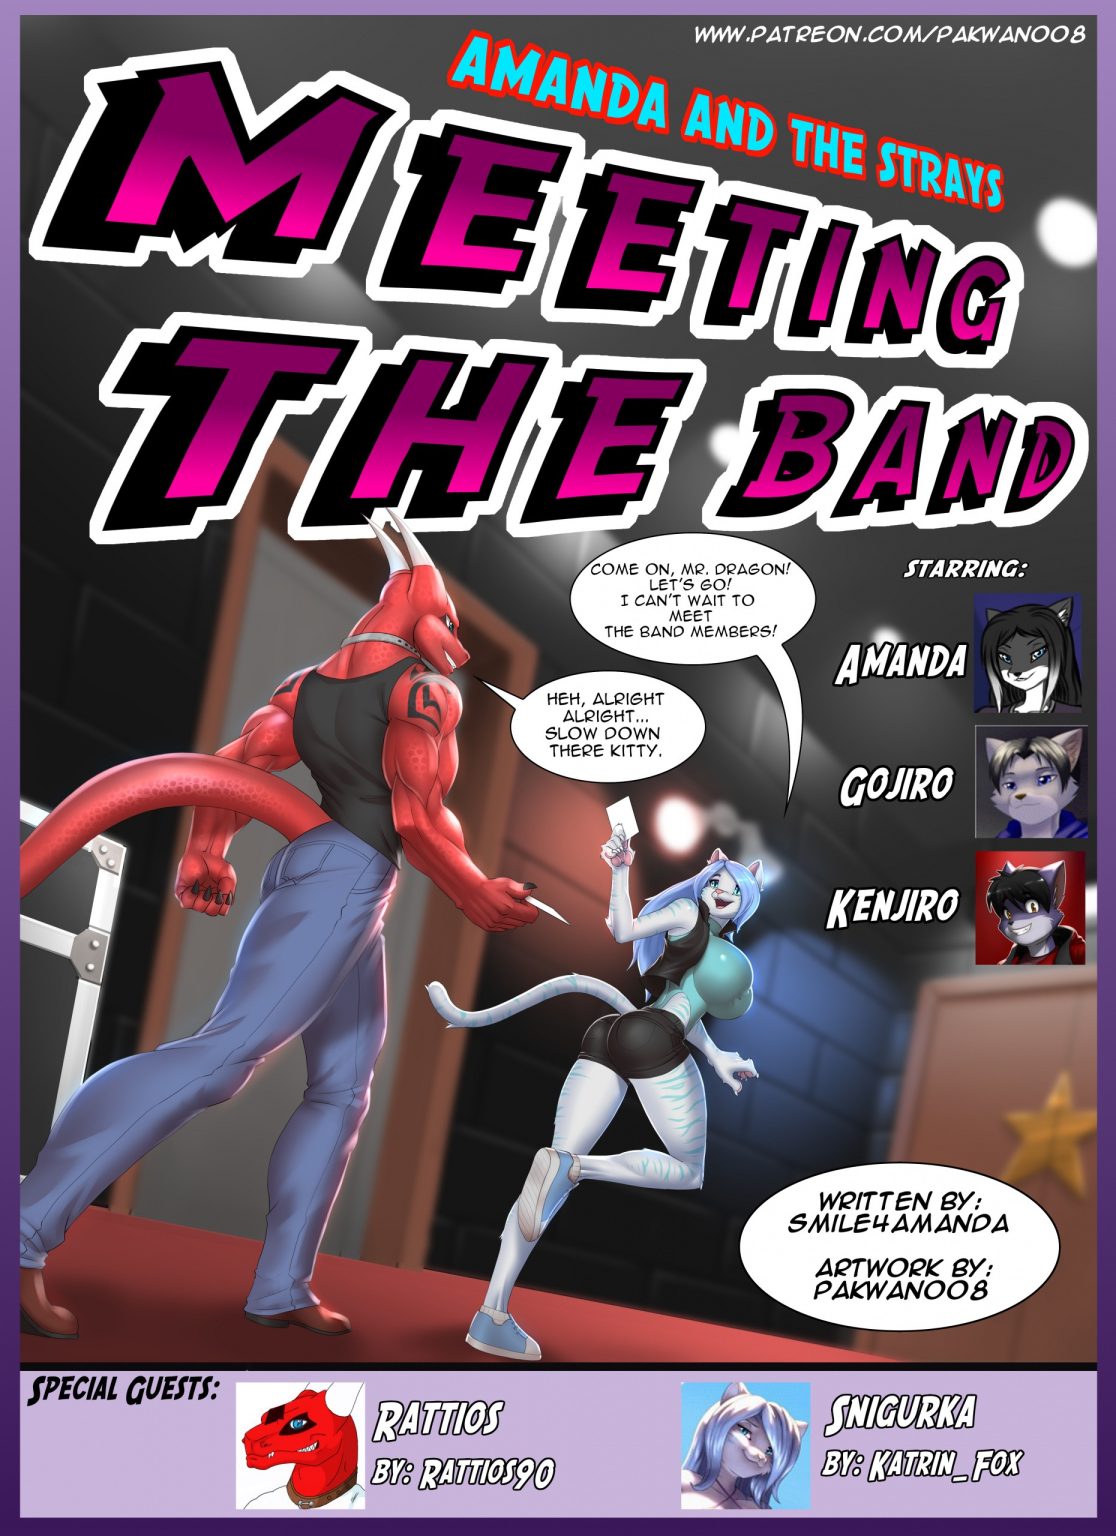 Amanda And The Strays: Meeting the Band porn comic picture 1